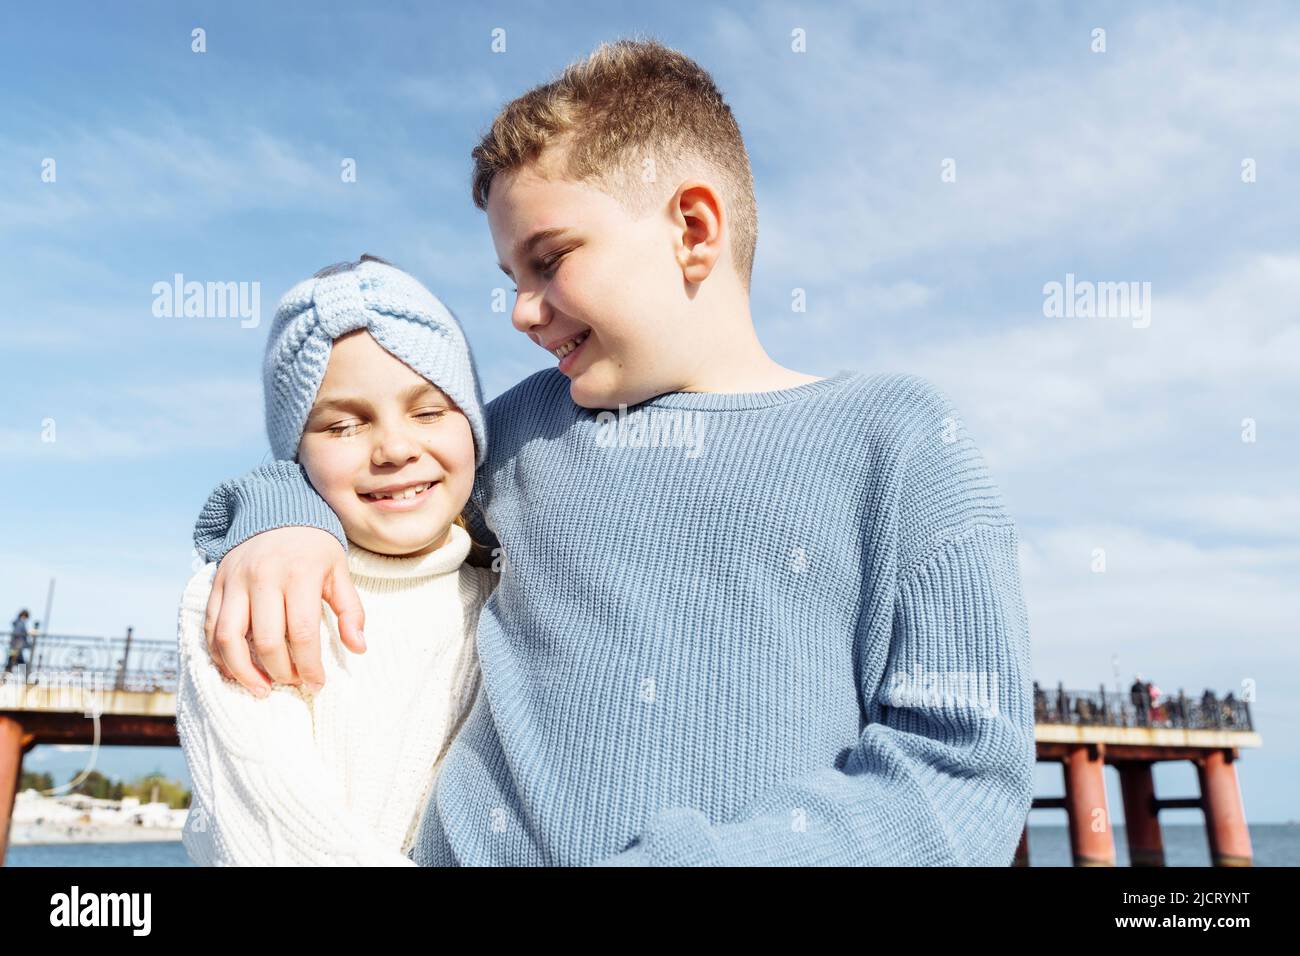 Portrait of a happy hugging brother and sister. Stock Photo